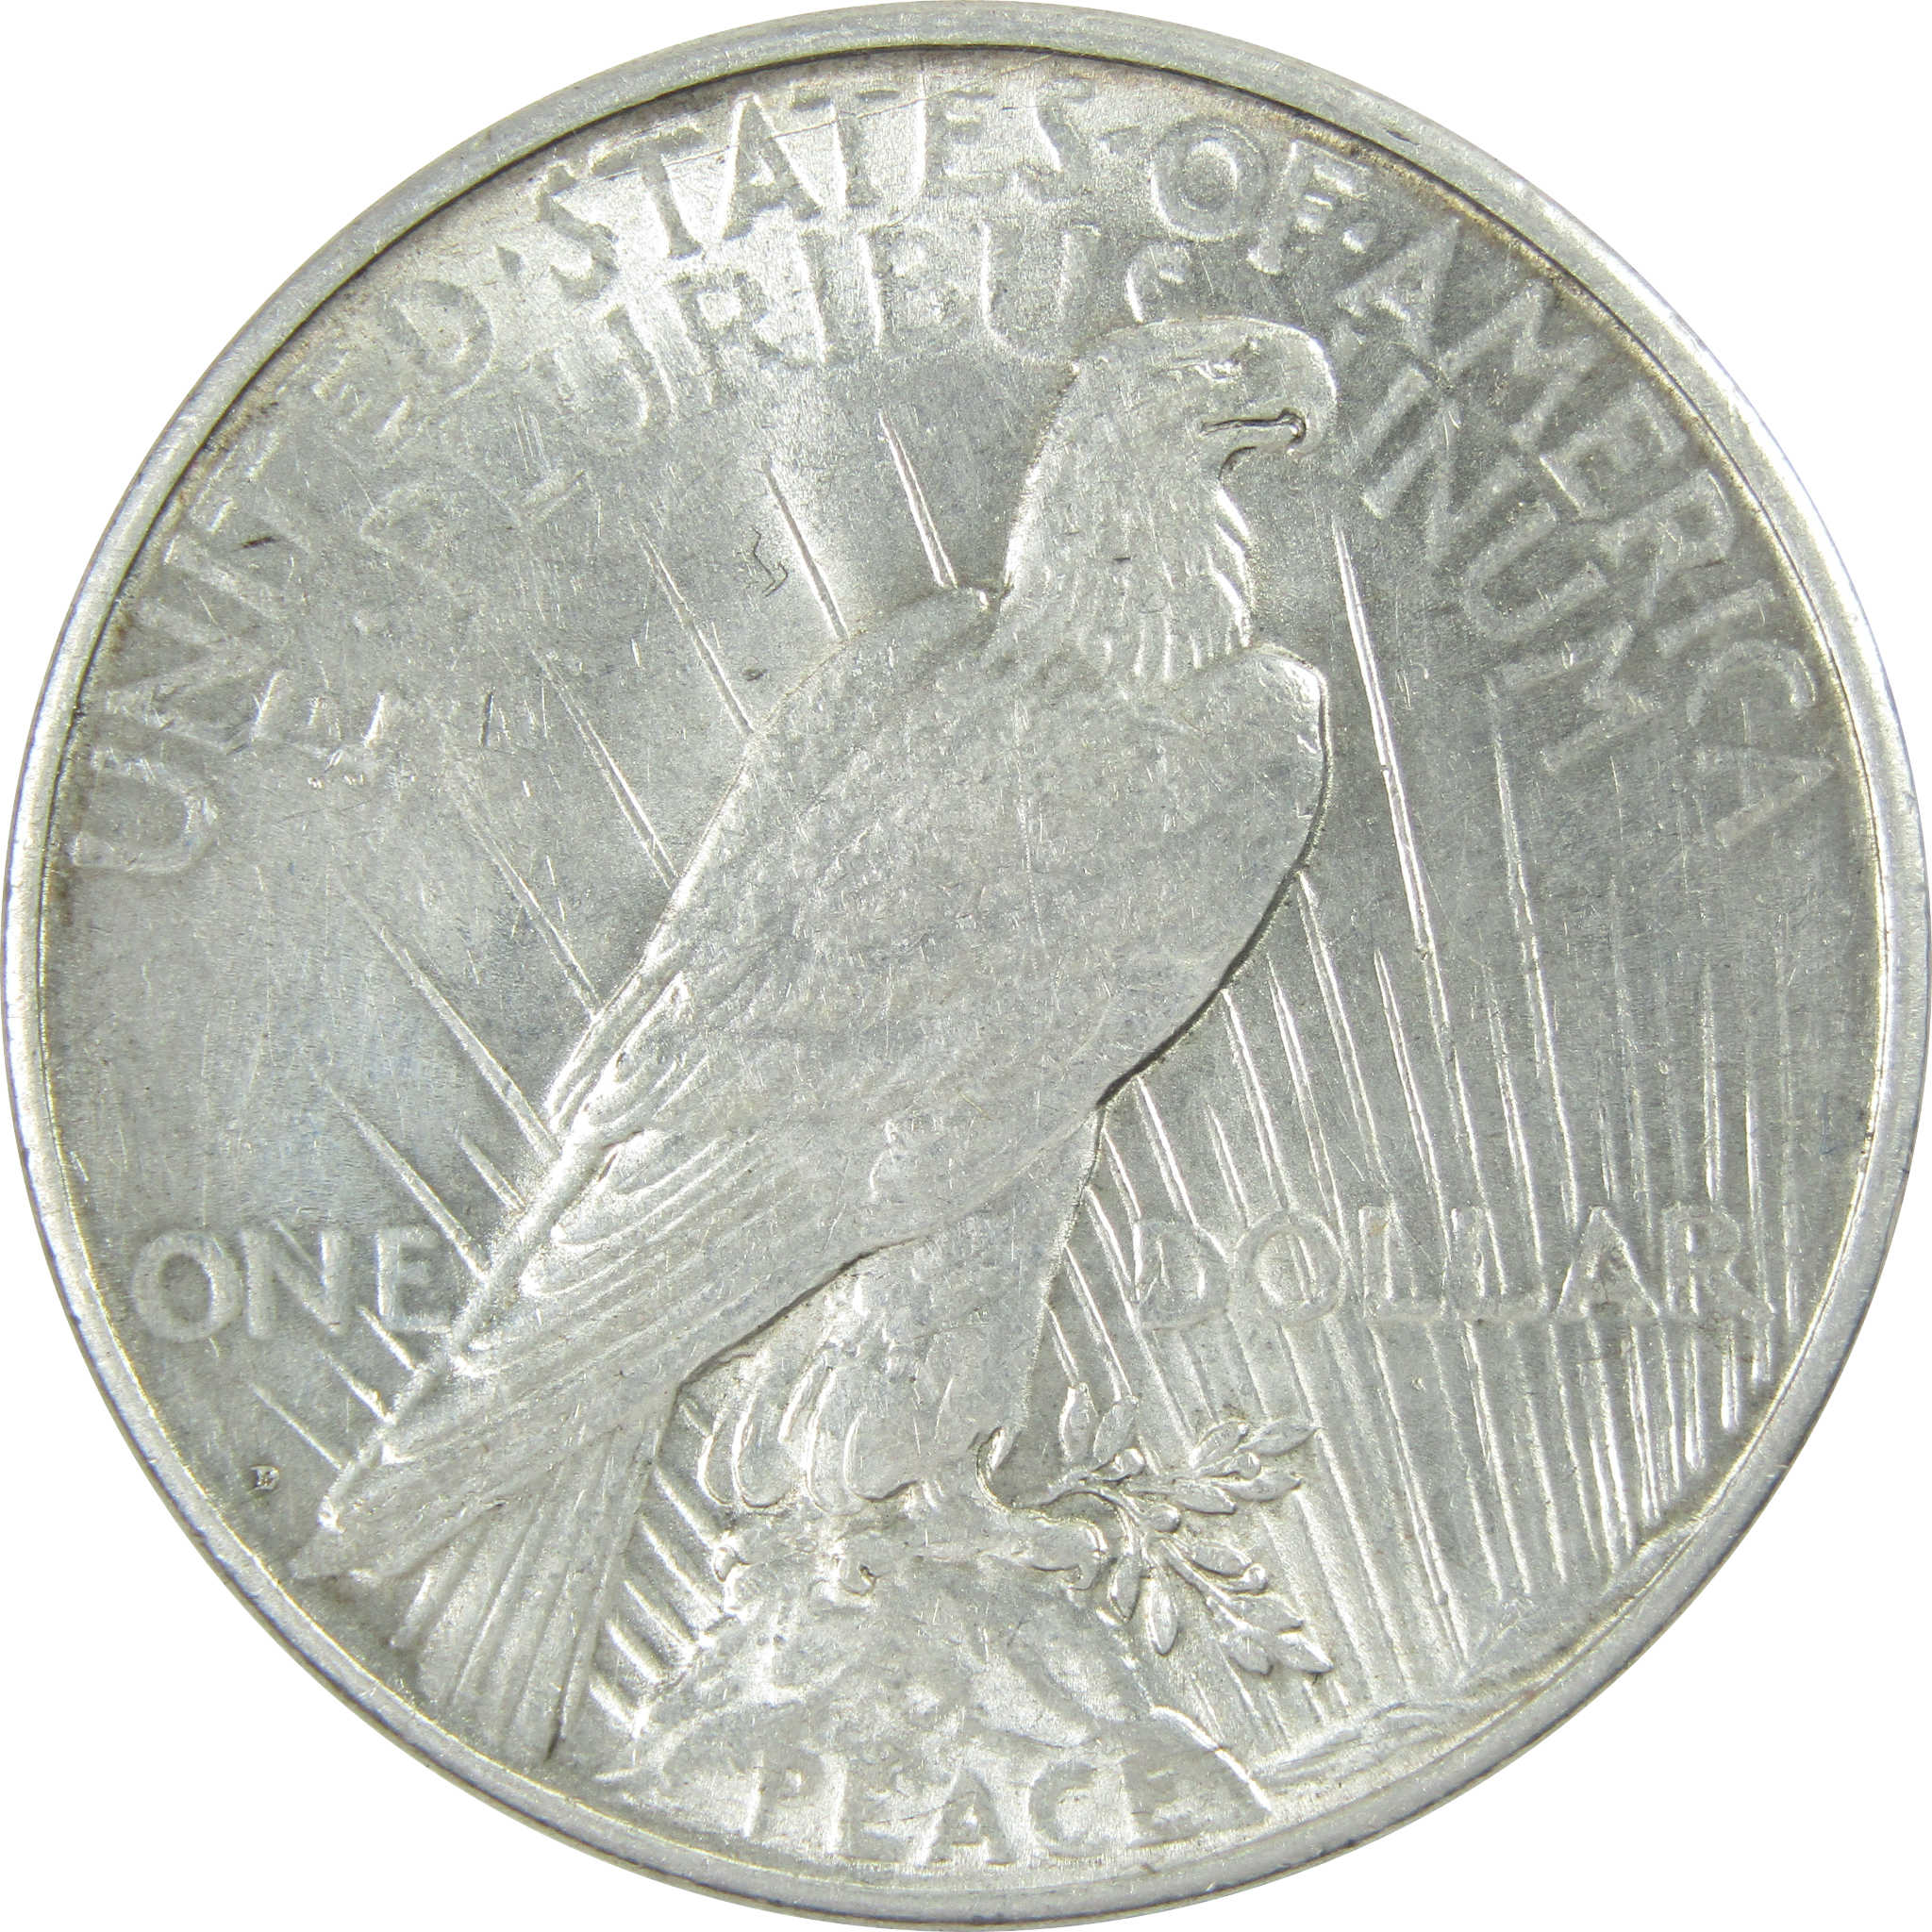 1926 D Peace Dollar AU About Uncirculated Silver $1 Coin SKU:I13685